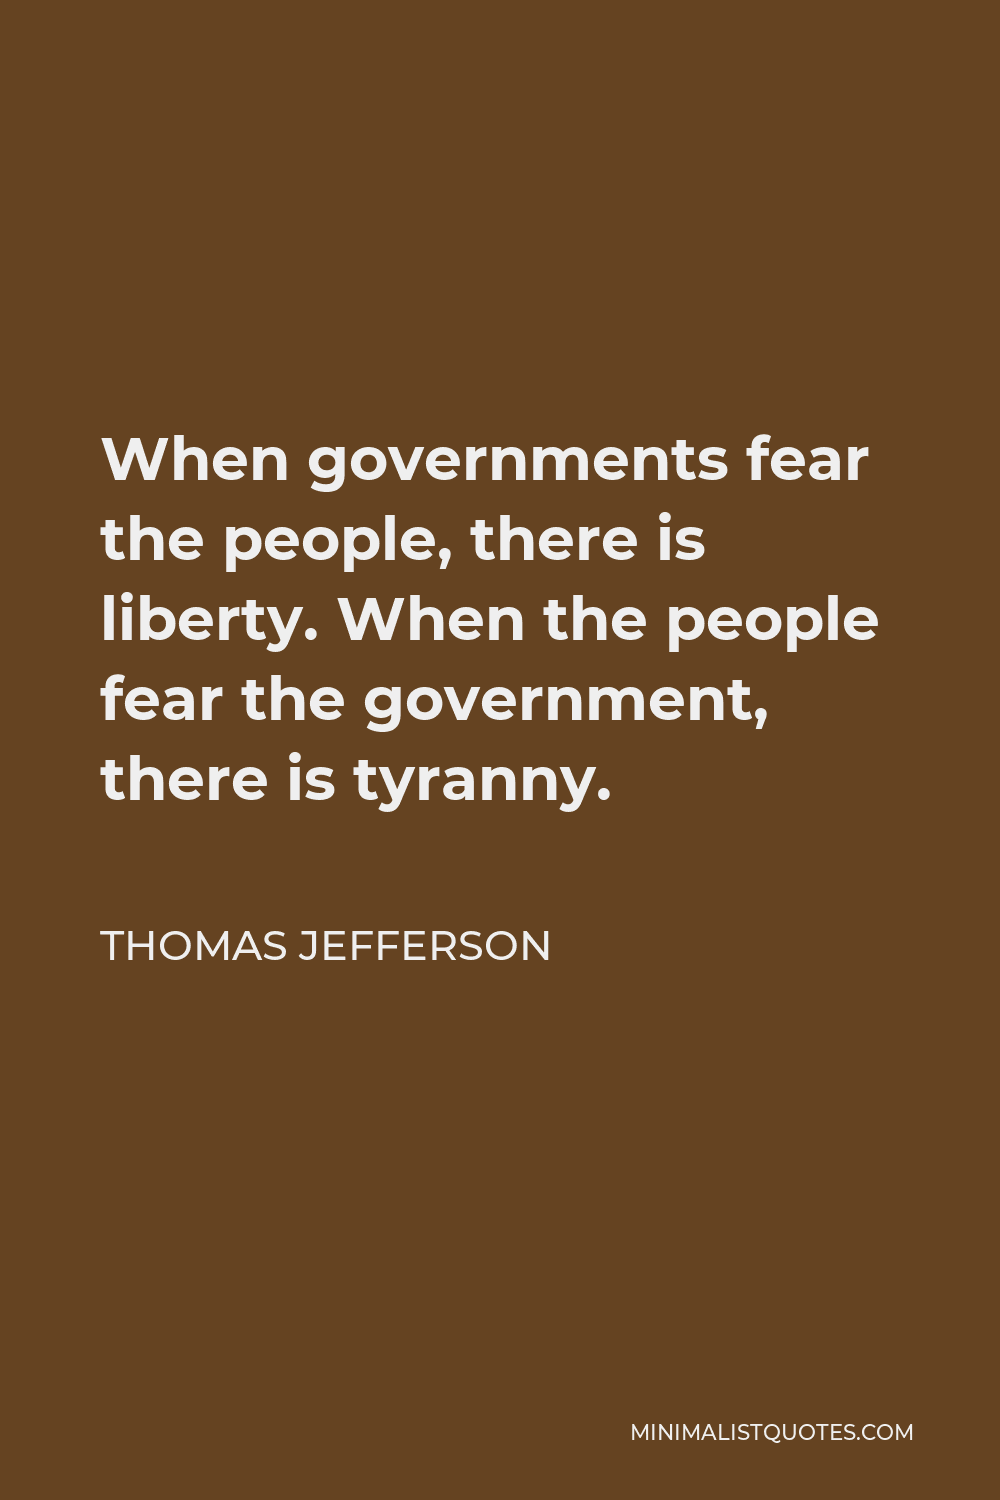 Thomas Jefferson Quote - When governments fear the people, there is liberty. When the people fear the government, there is tyranny.